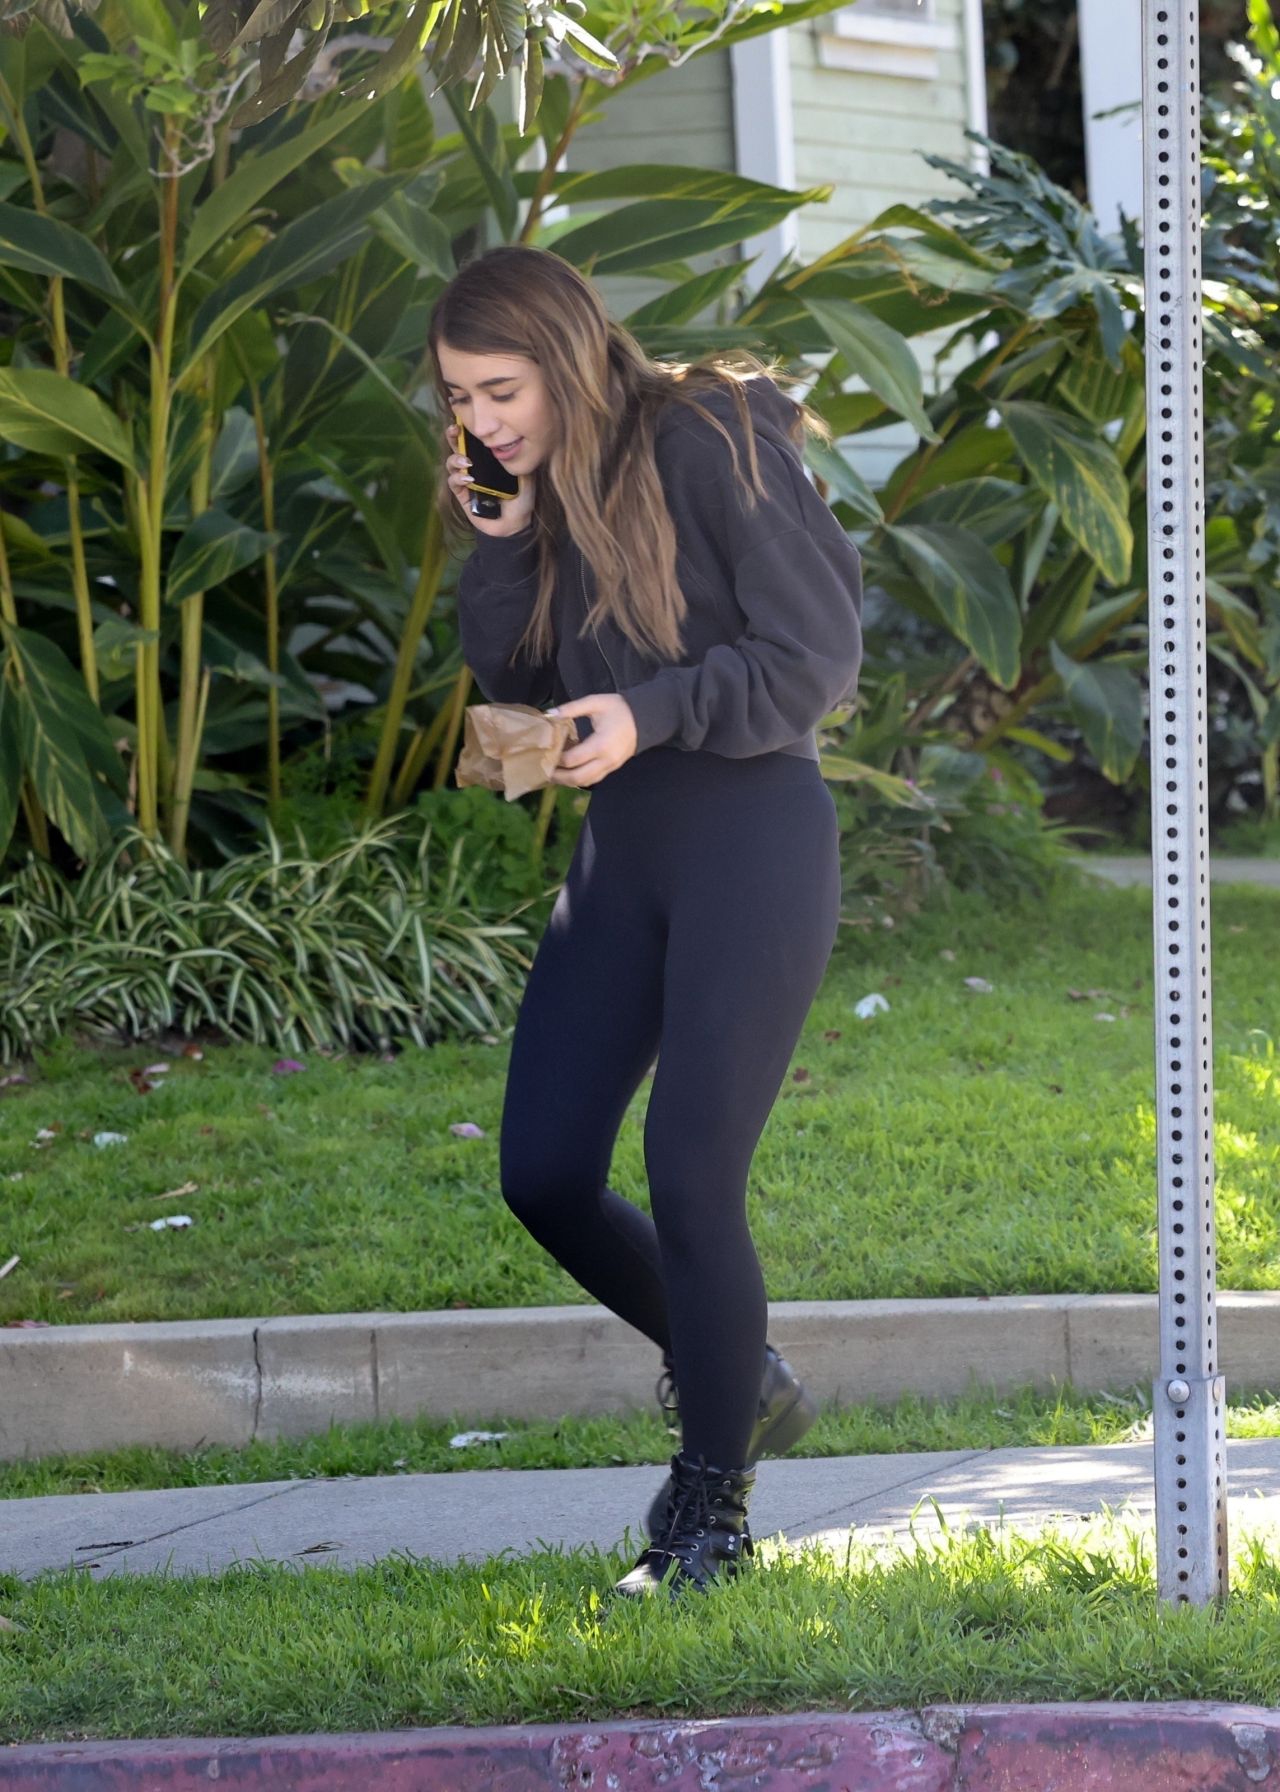 Caylee Cowan dons a black crop top and leggings while out shopping